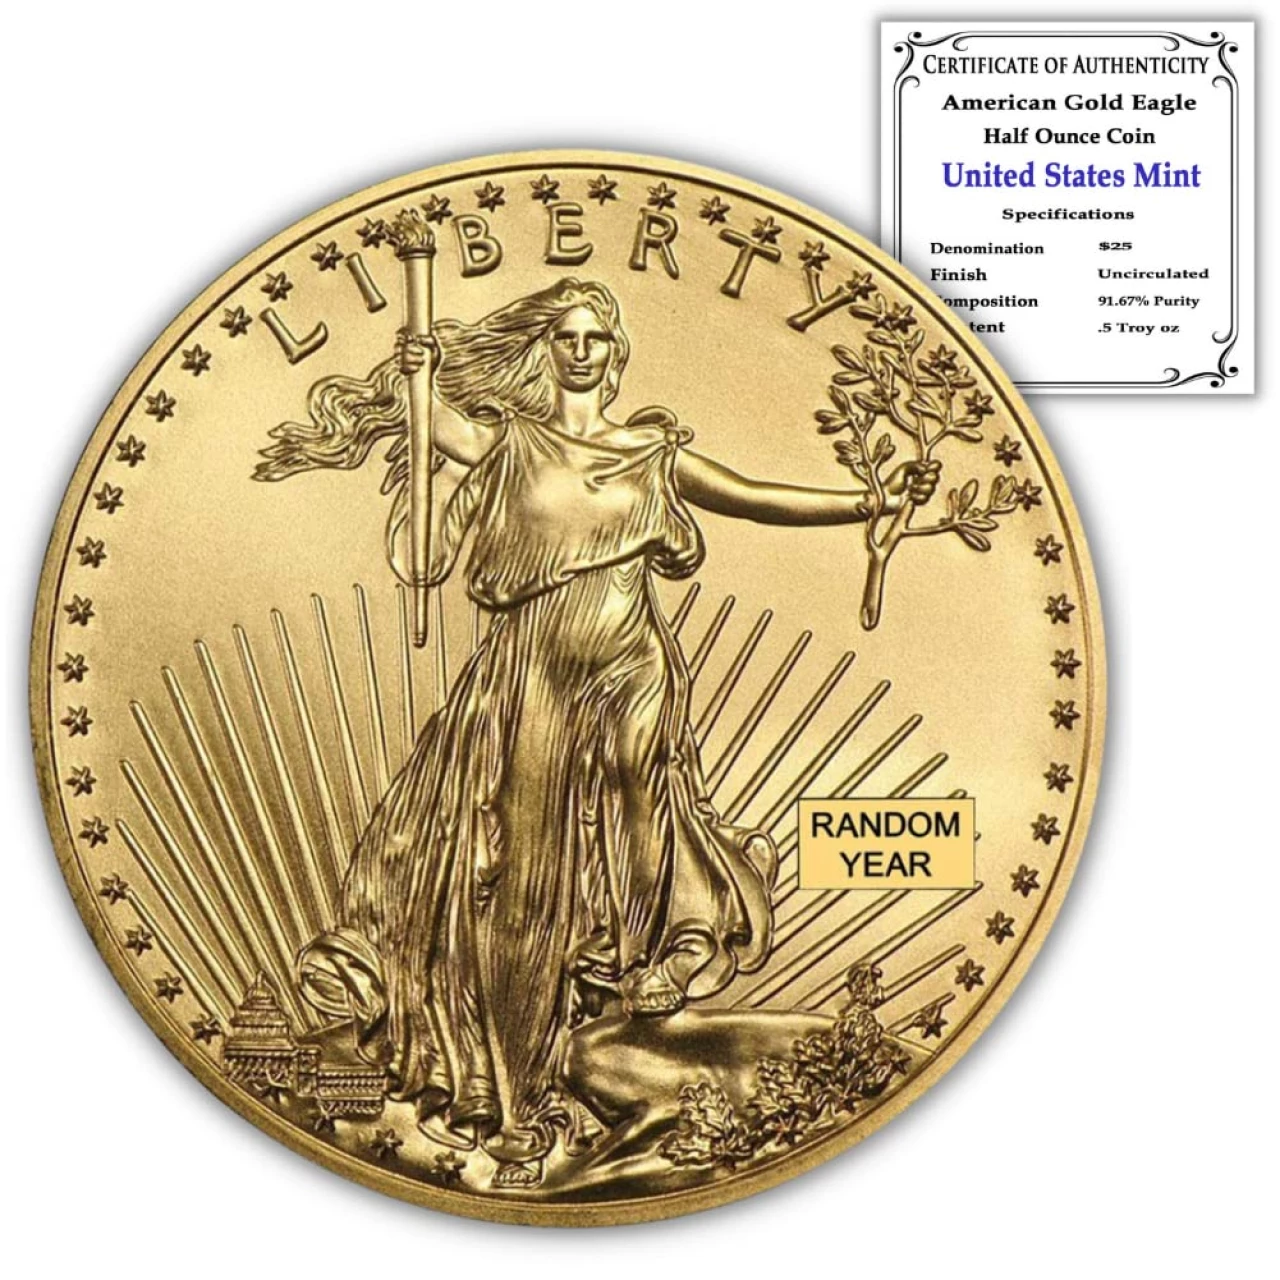 1/2 oz American Gold Eagle Brilliant Uncirculated (BU -Type 1 or 2) with Certificate of Authenticity $25 Mint State